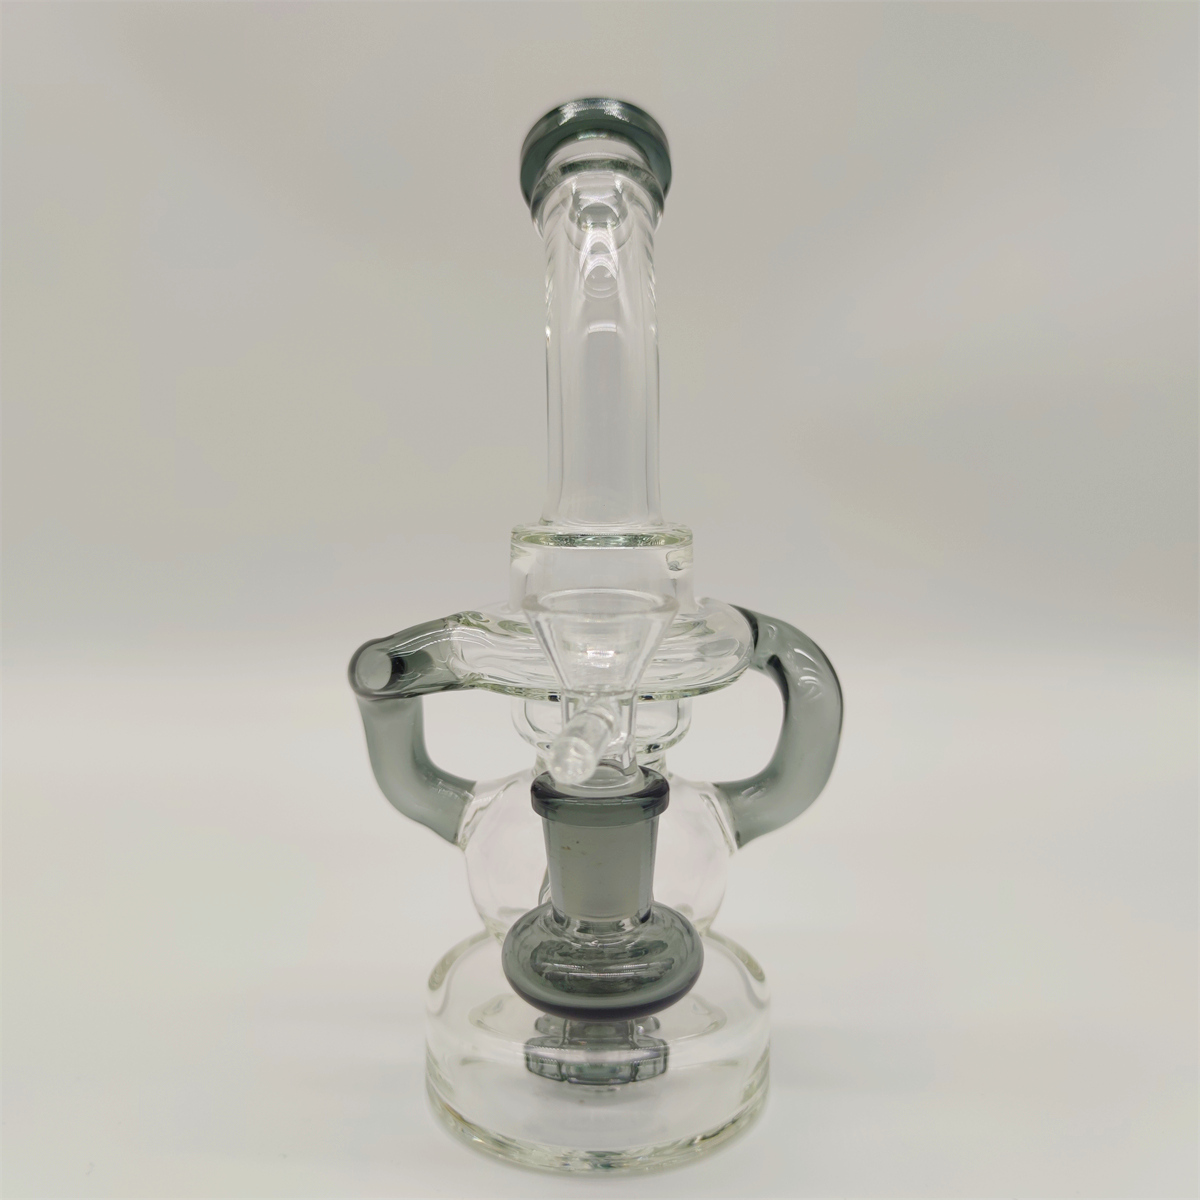 2022 8 Inch Clear Black Glass Water Pipe Bong Dabber Rig Recycler Pipes Bongs Smoke Pipes 14.4mm Female Joint with Regular Bowl&Banger US Warehouse